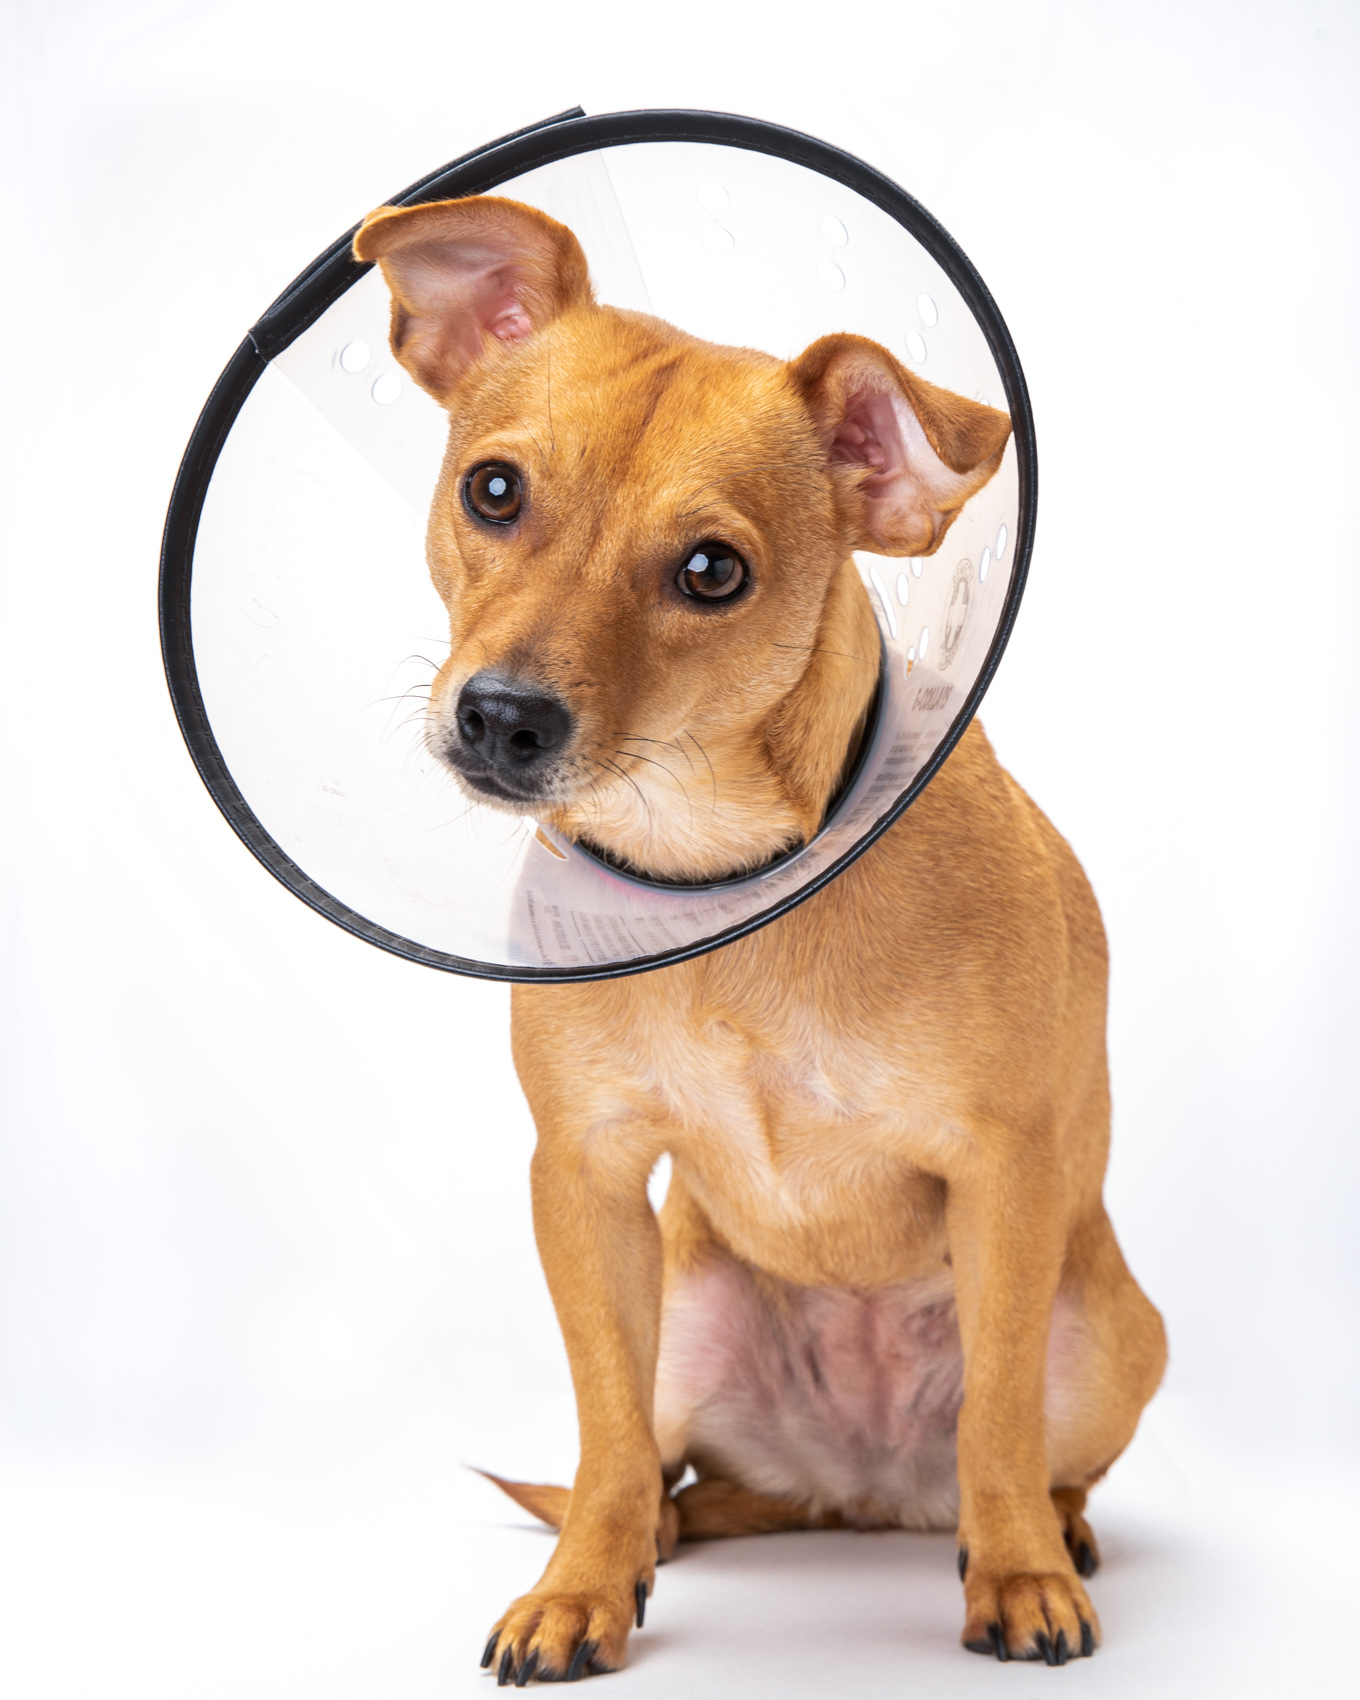 Dog Studio Photography | Small Dog with Veterinary E-Collar by Mark Rogers